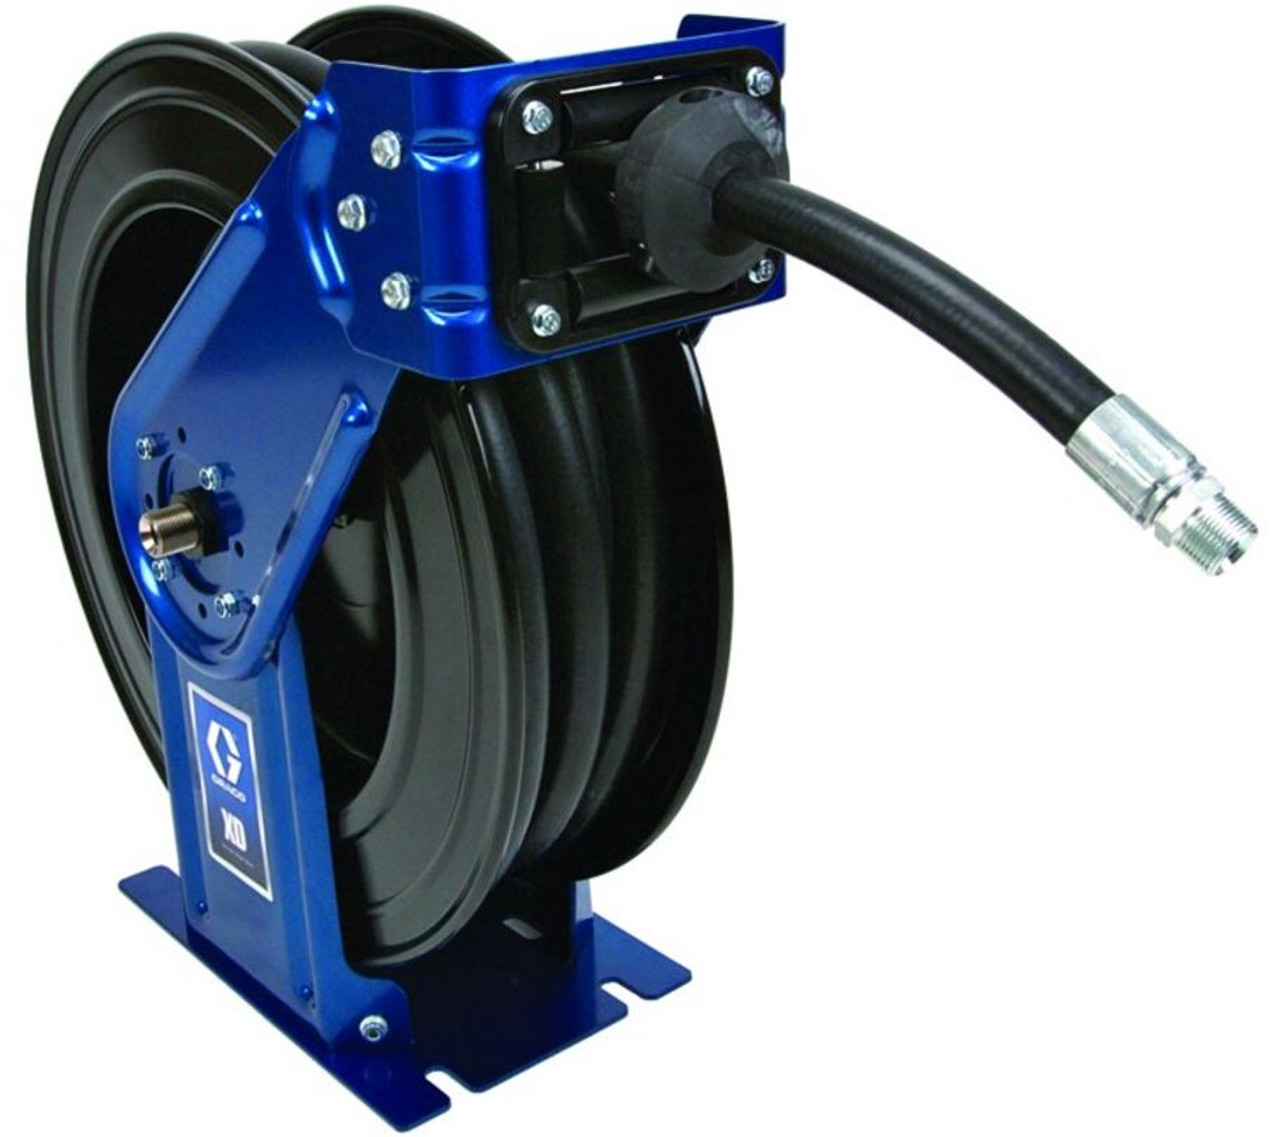 Spring Driven Hose Reel For Air And Water Tansfer , Heavy Duty